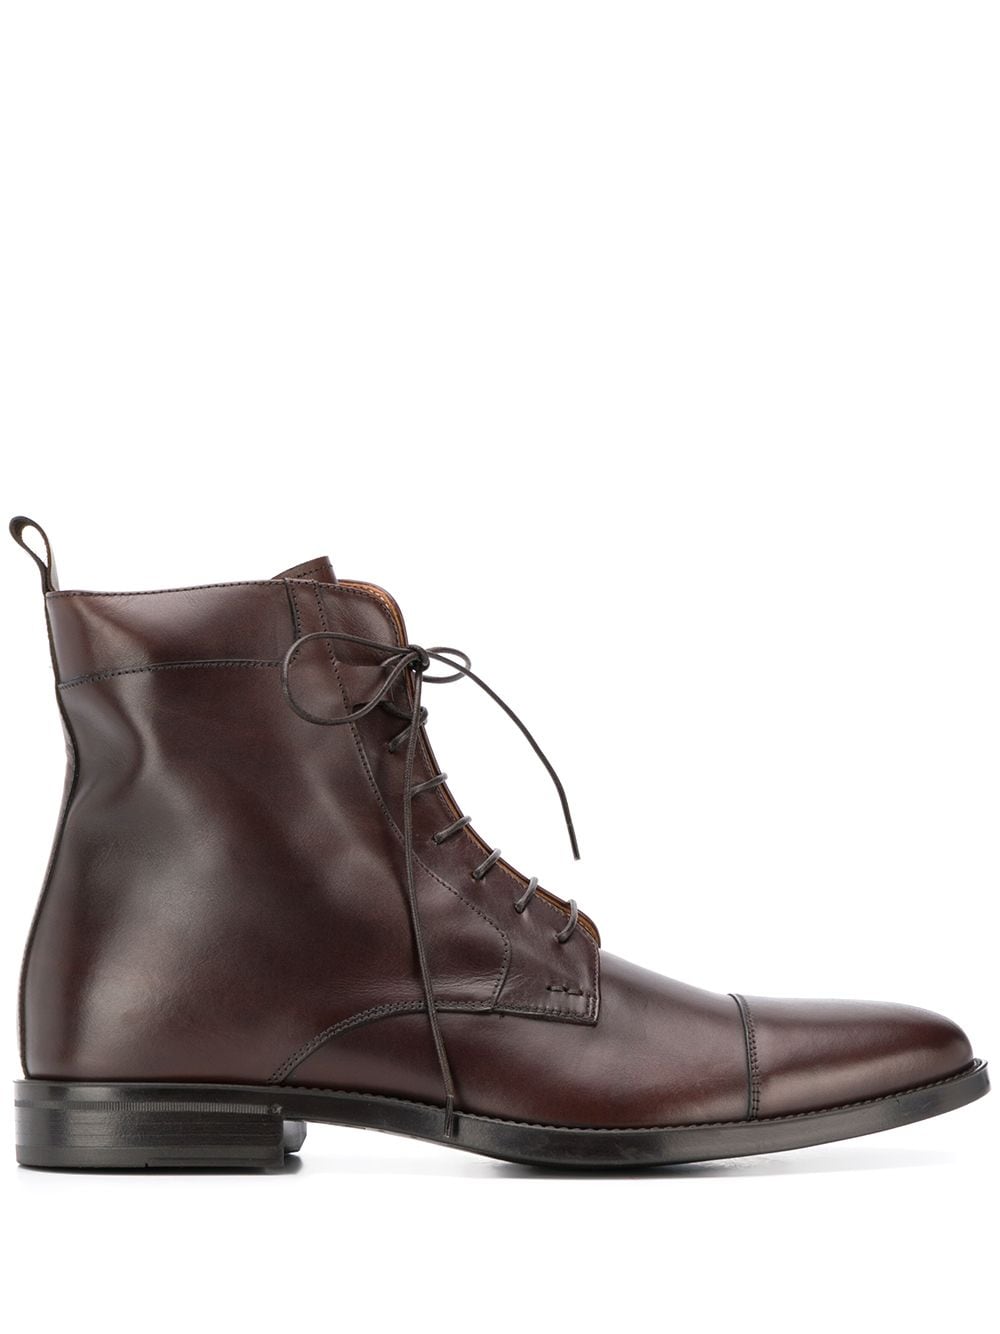 Scarosso lace up boots - Brown von Scarosso